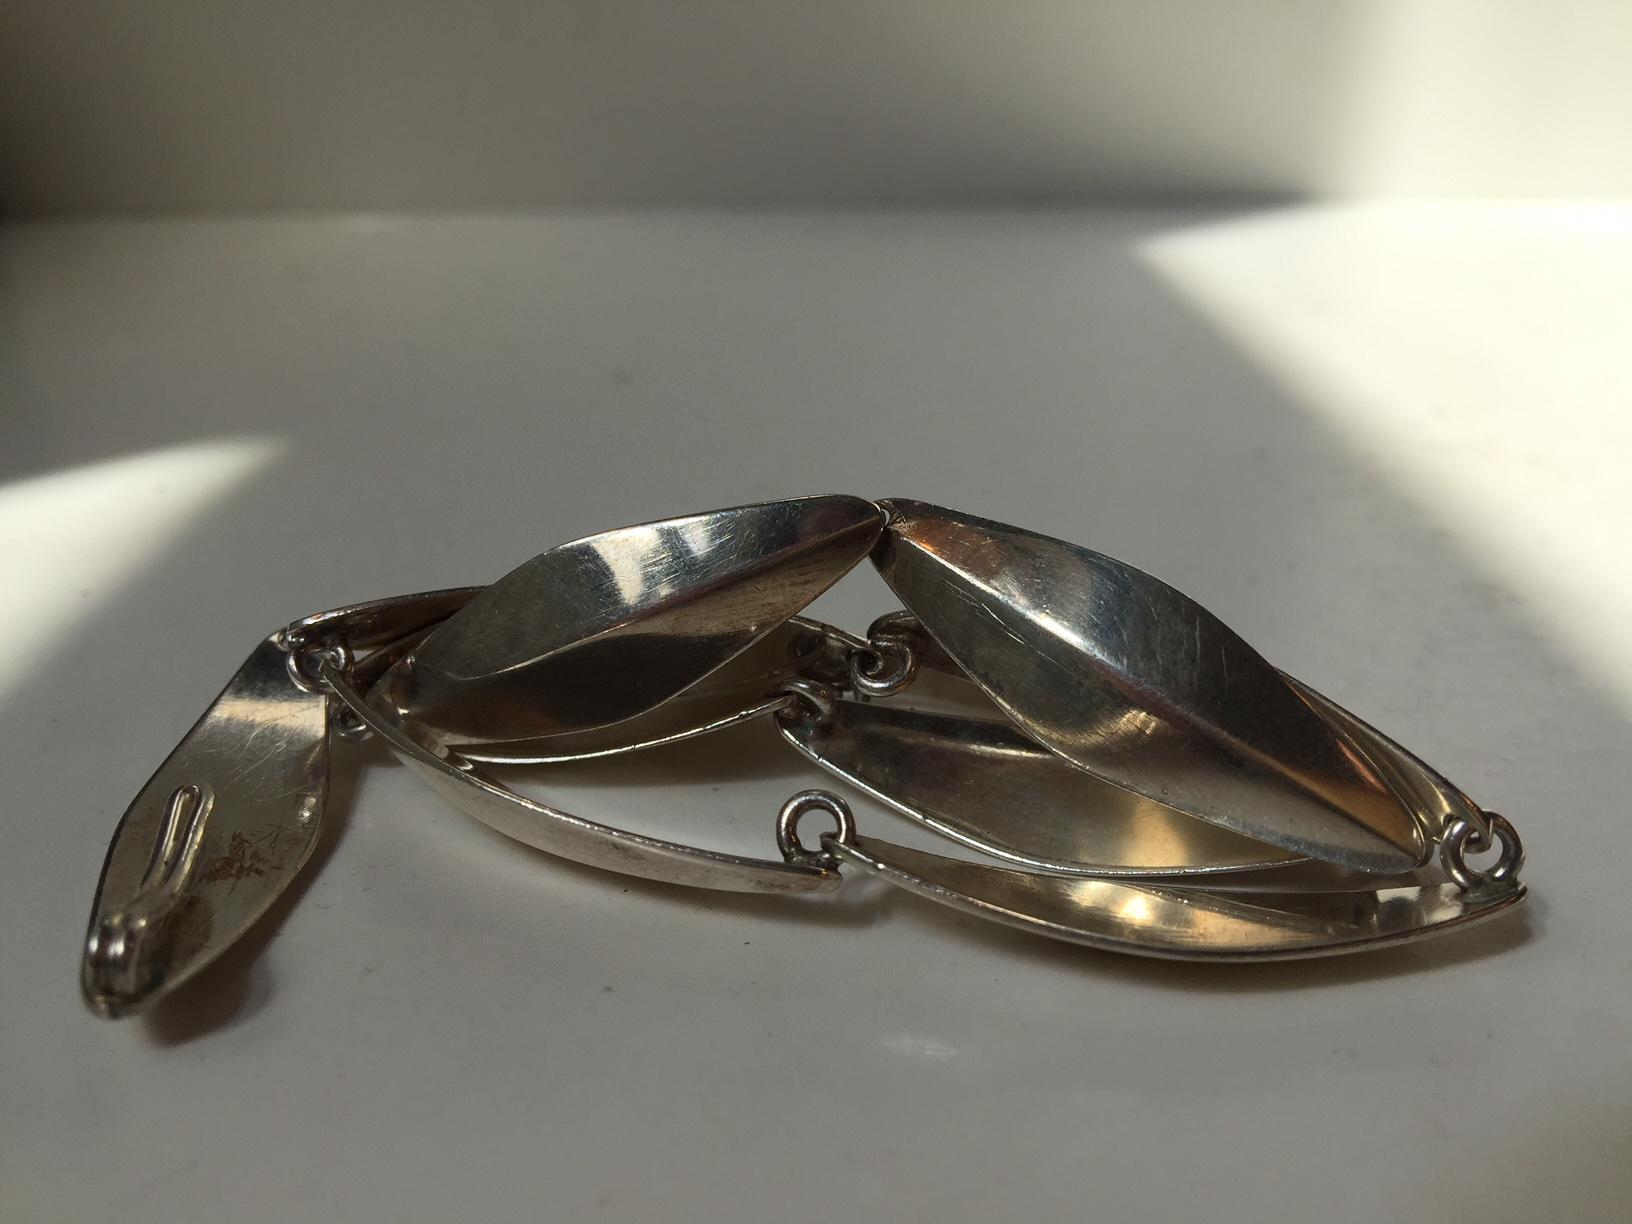 This Mid-Century Modern necklace sometimes referred to as Peak or Leaf was made by the Danish silversmith Bent Knudsen. Bent Knudsen designed for the Hans Hansen Silver Smithy before opening his own studio in 1956. The catch of the necklace is